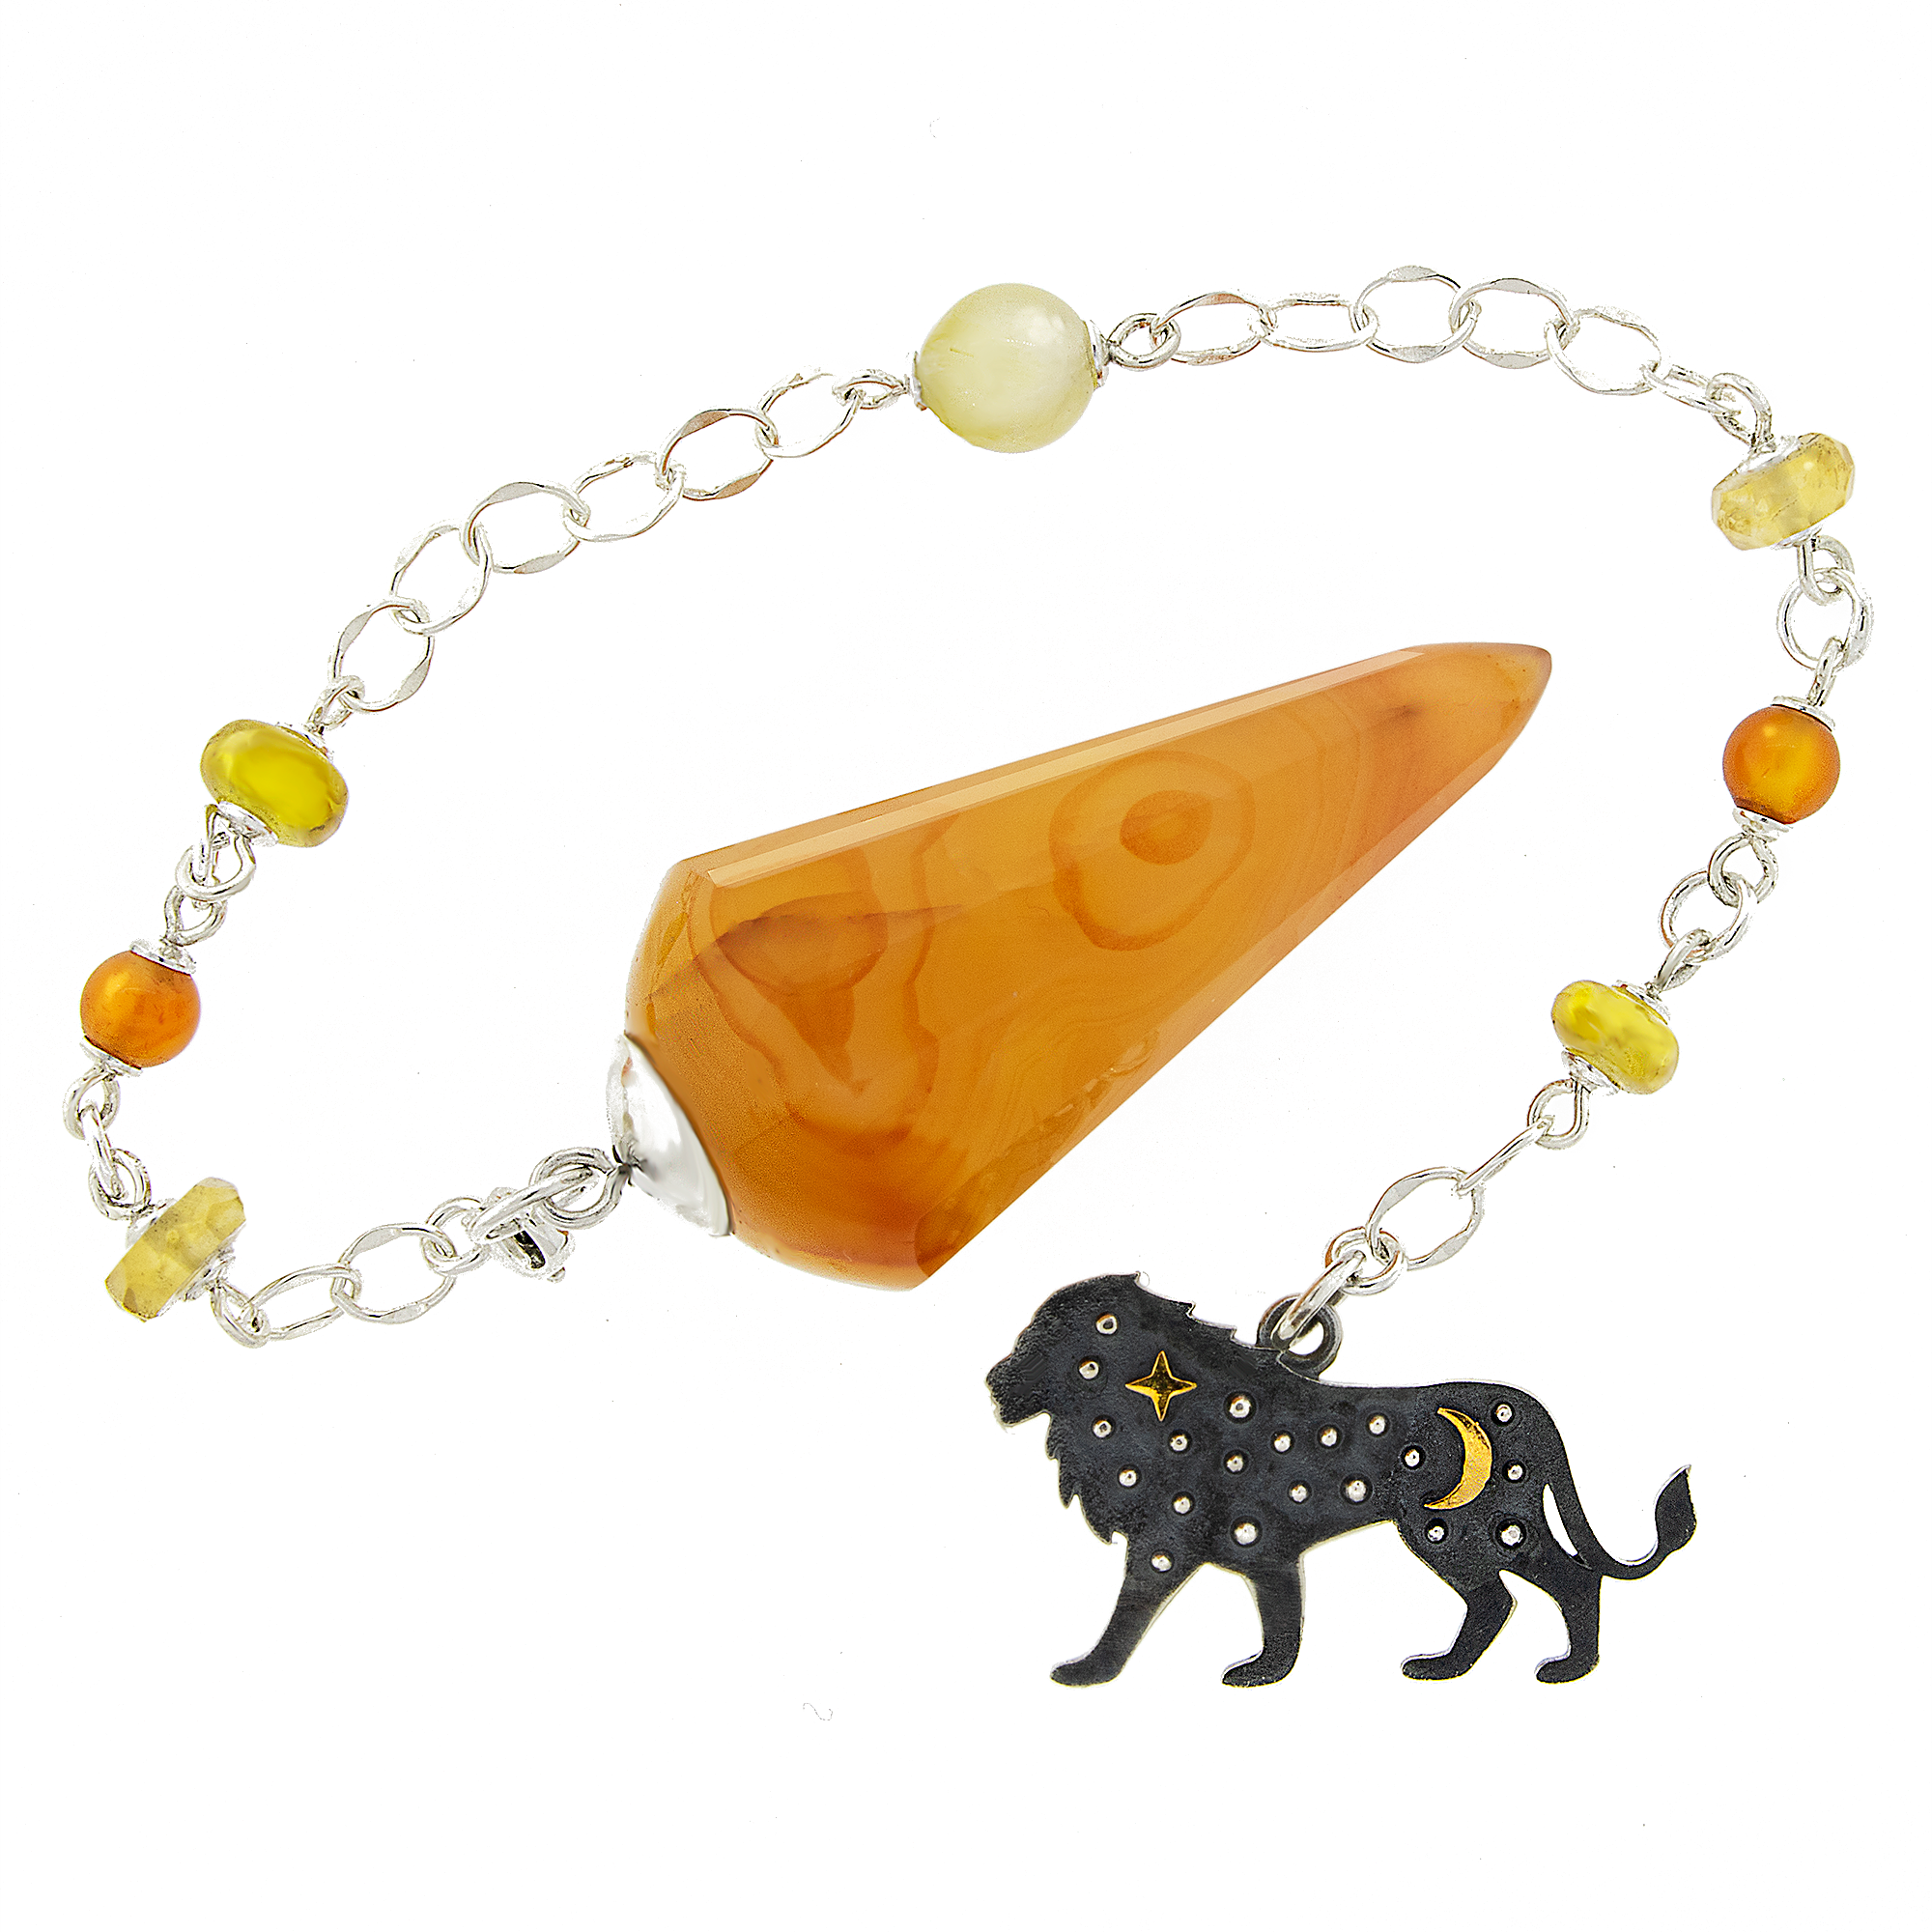 One of a Kind #347 - Carnelian, Yellow Sapphire, Citrine, Rutilated Quartz and Sterling Silver Pendulum